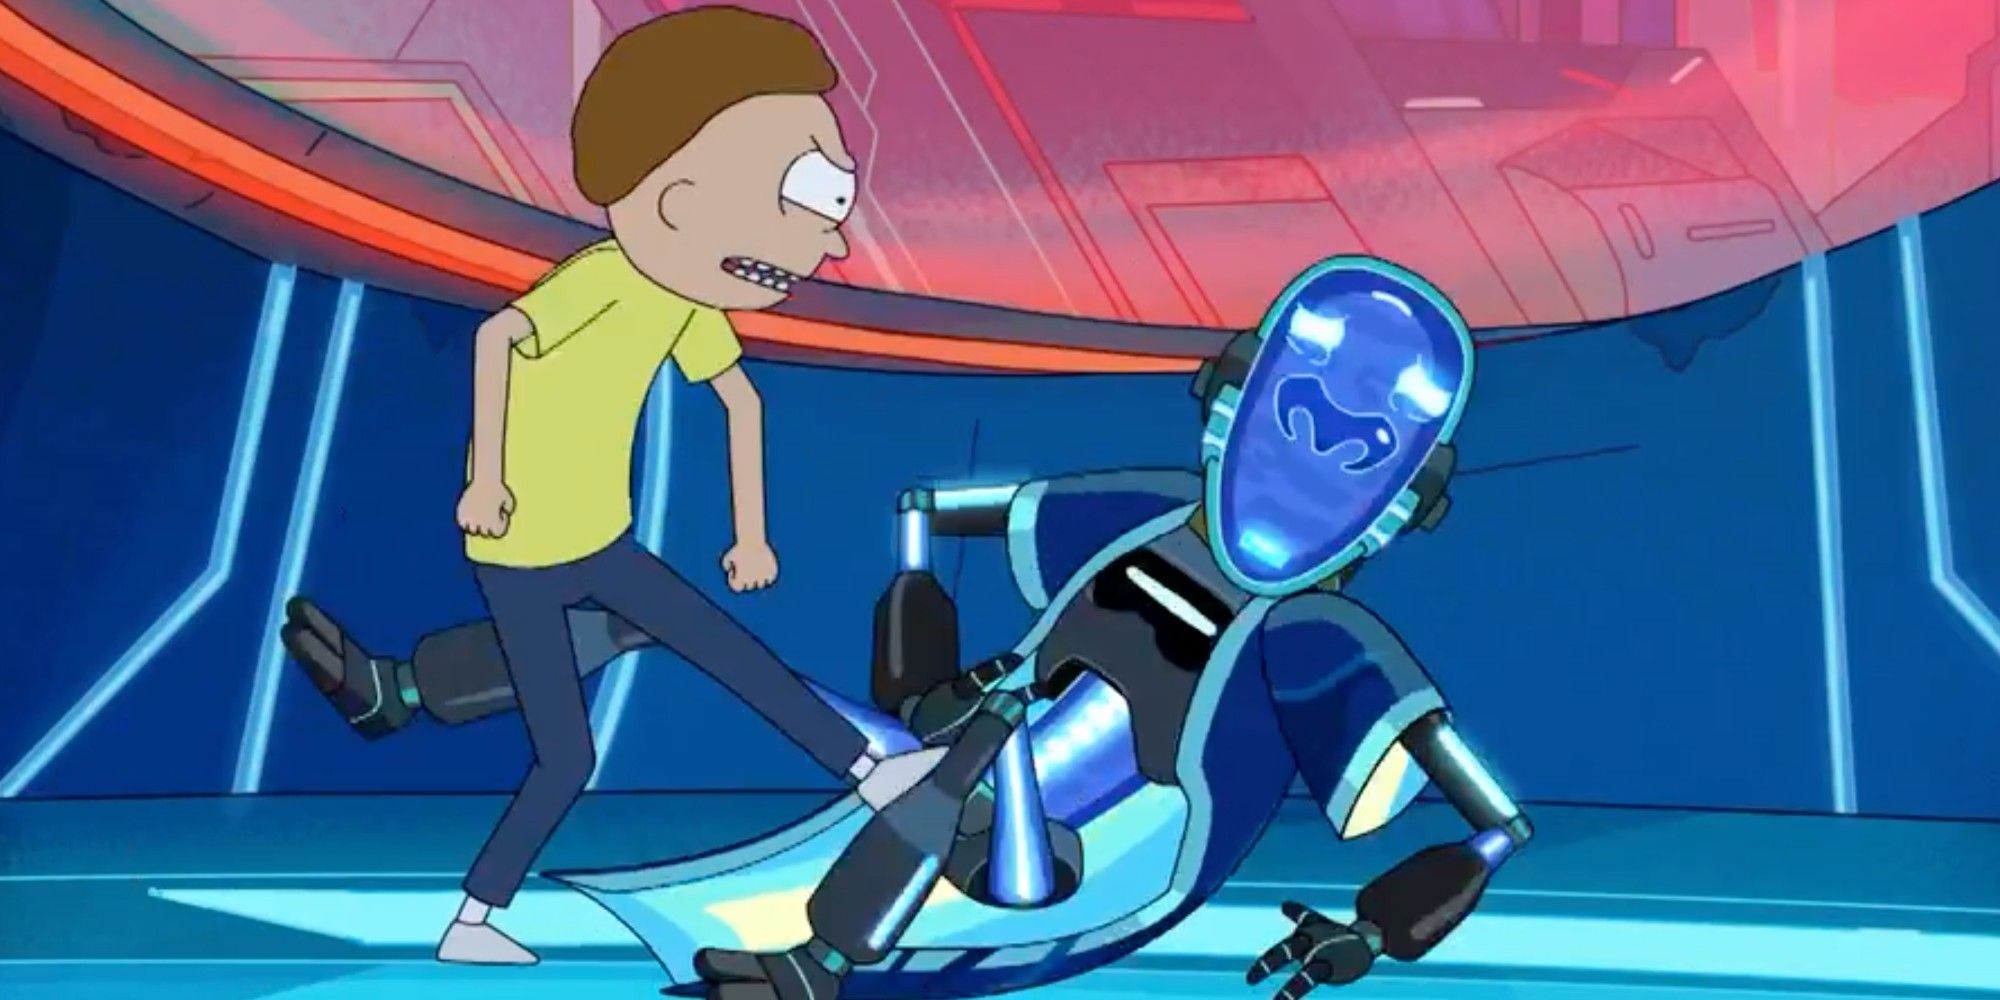 Morty angrily kicks a fallen robot in Rick & Morty